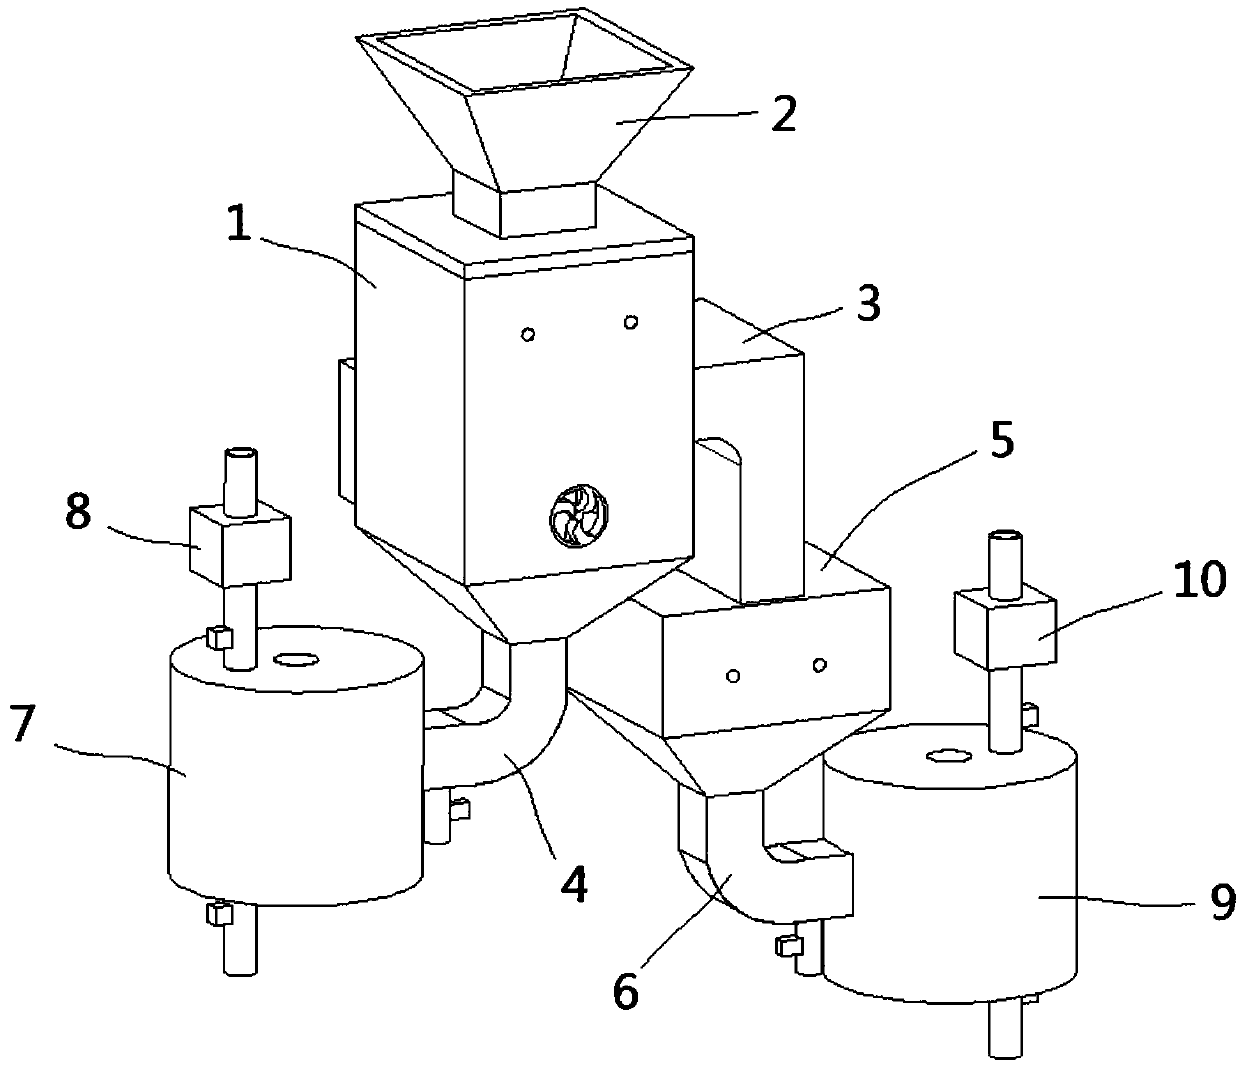 Industrial solid waste disposal device